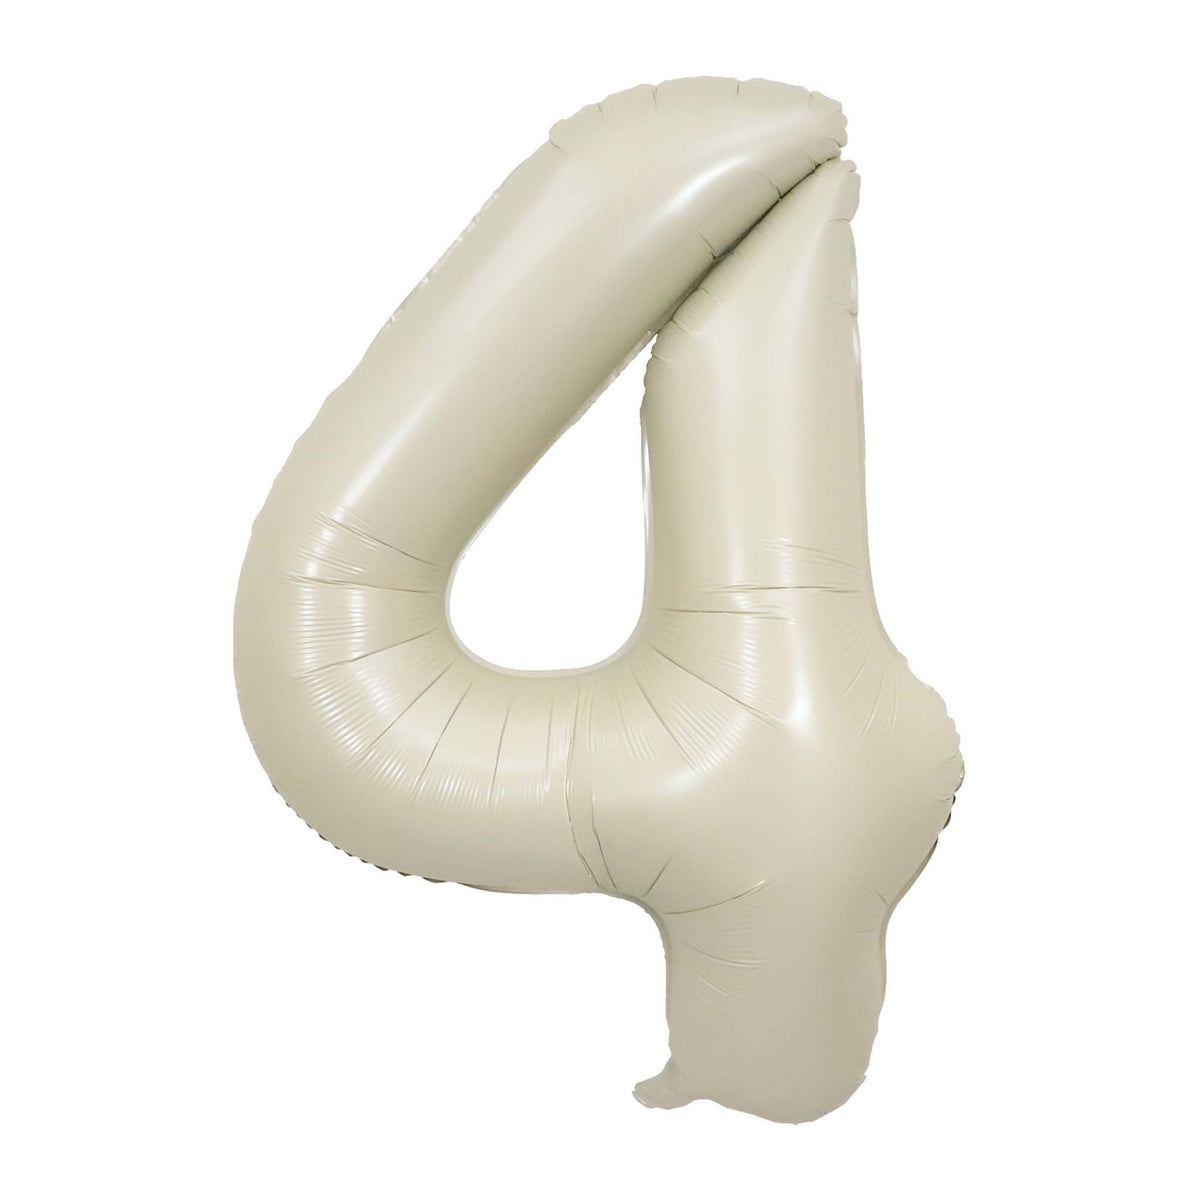 PARTYGRAM Balloons Ivory Number 4 Foil Balloon, Creamy White Matte Finish, 34 Inches 810077658284